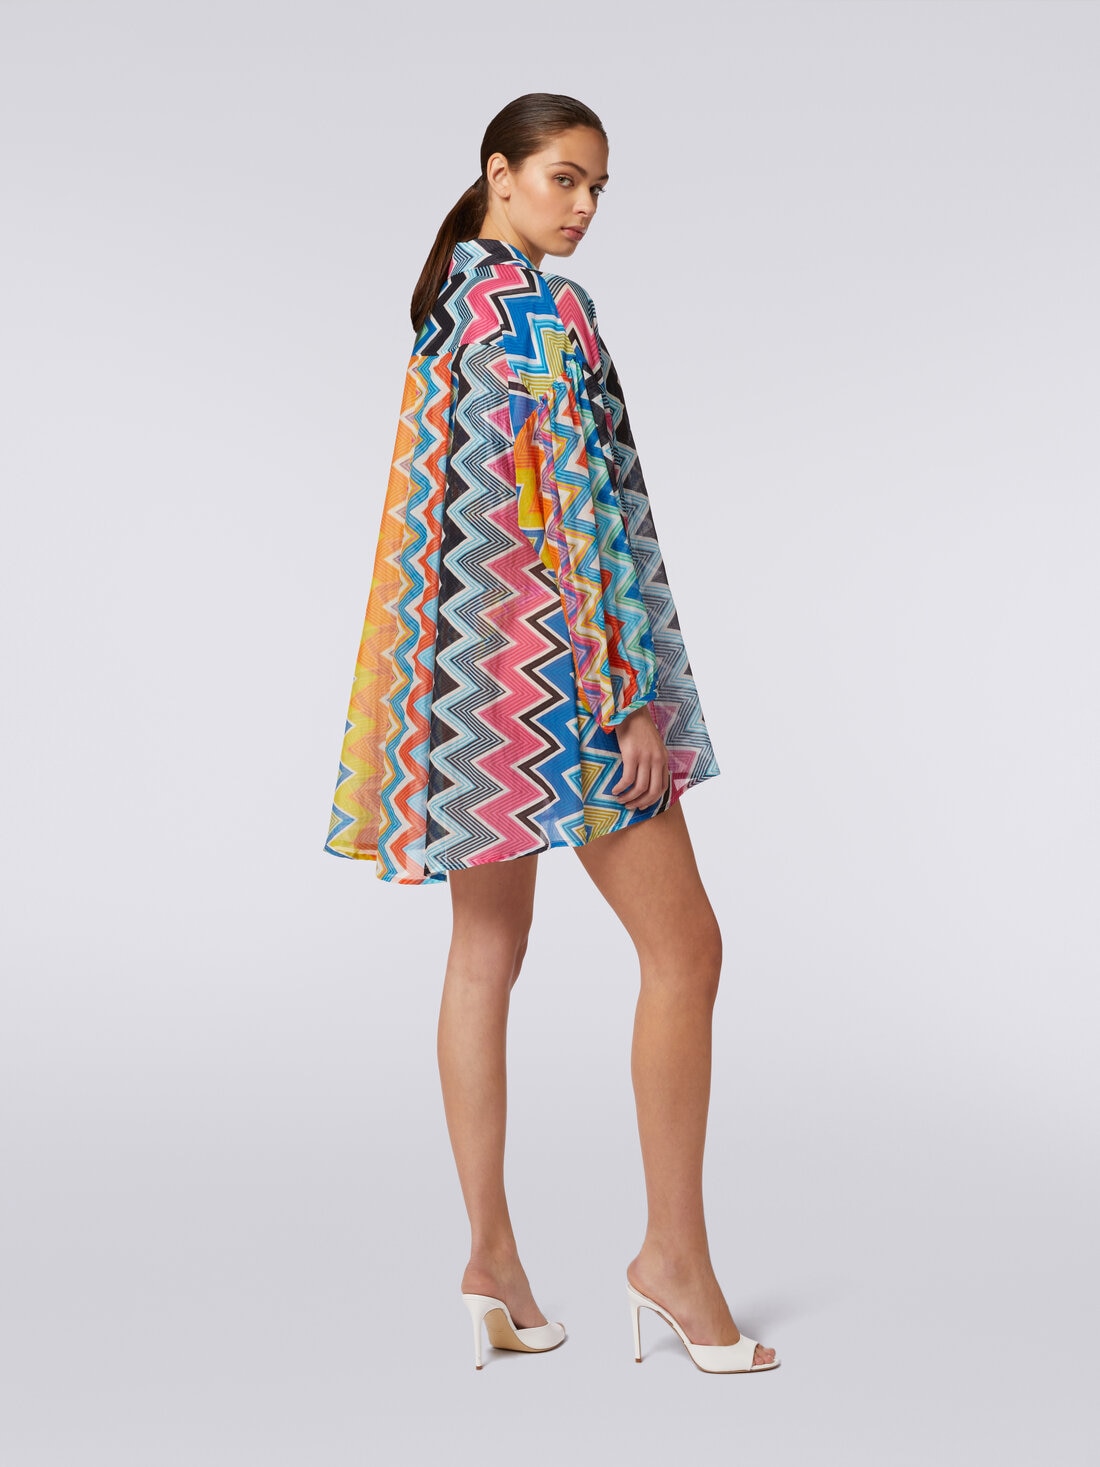 Silk and cotton oversize blouse with zigzag print, Multicoloured  - MC24SK00BW00TFSM9D7 - 3